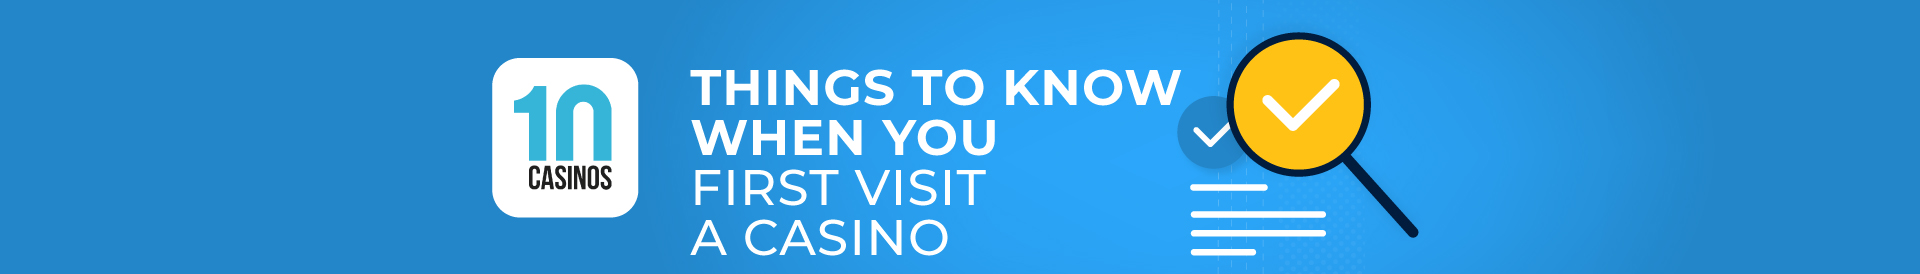 top 10 things to know when you first visit a casino desktop